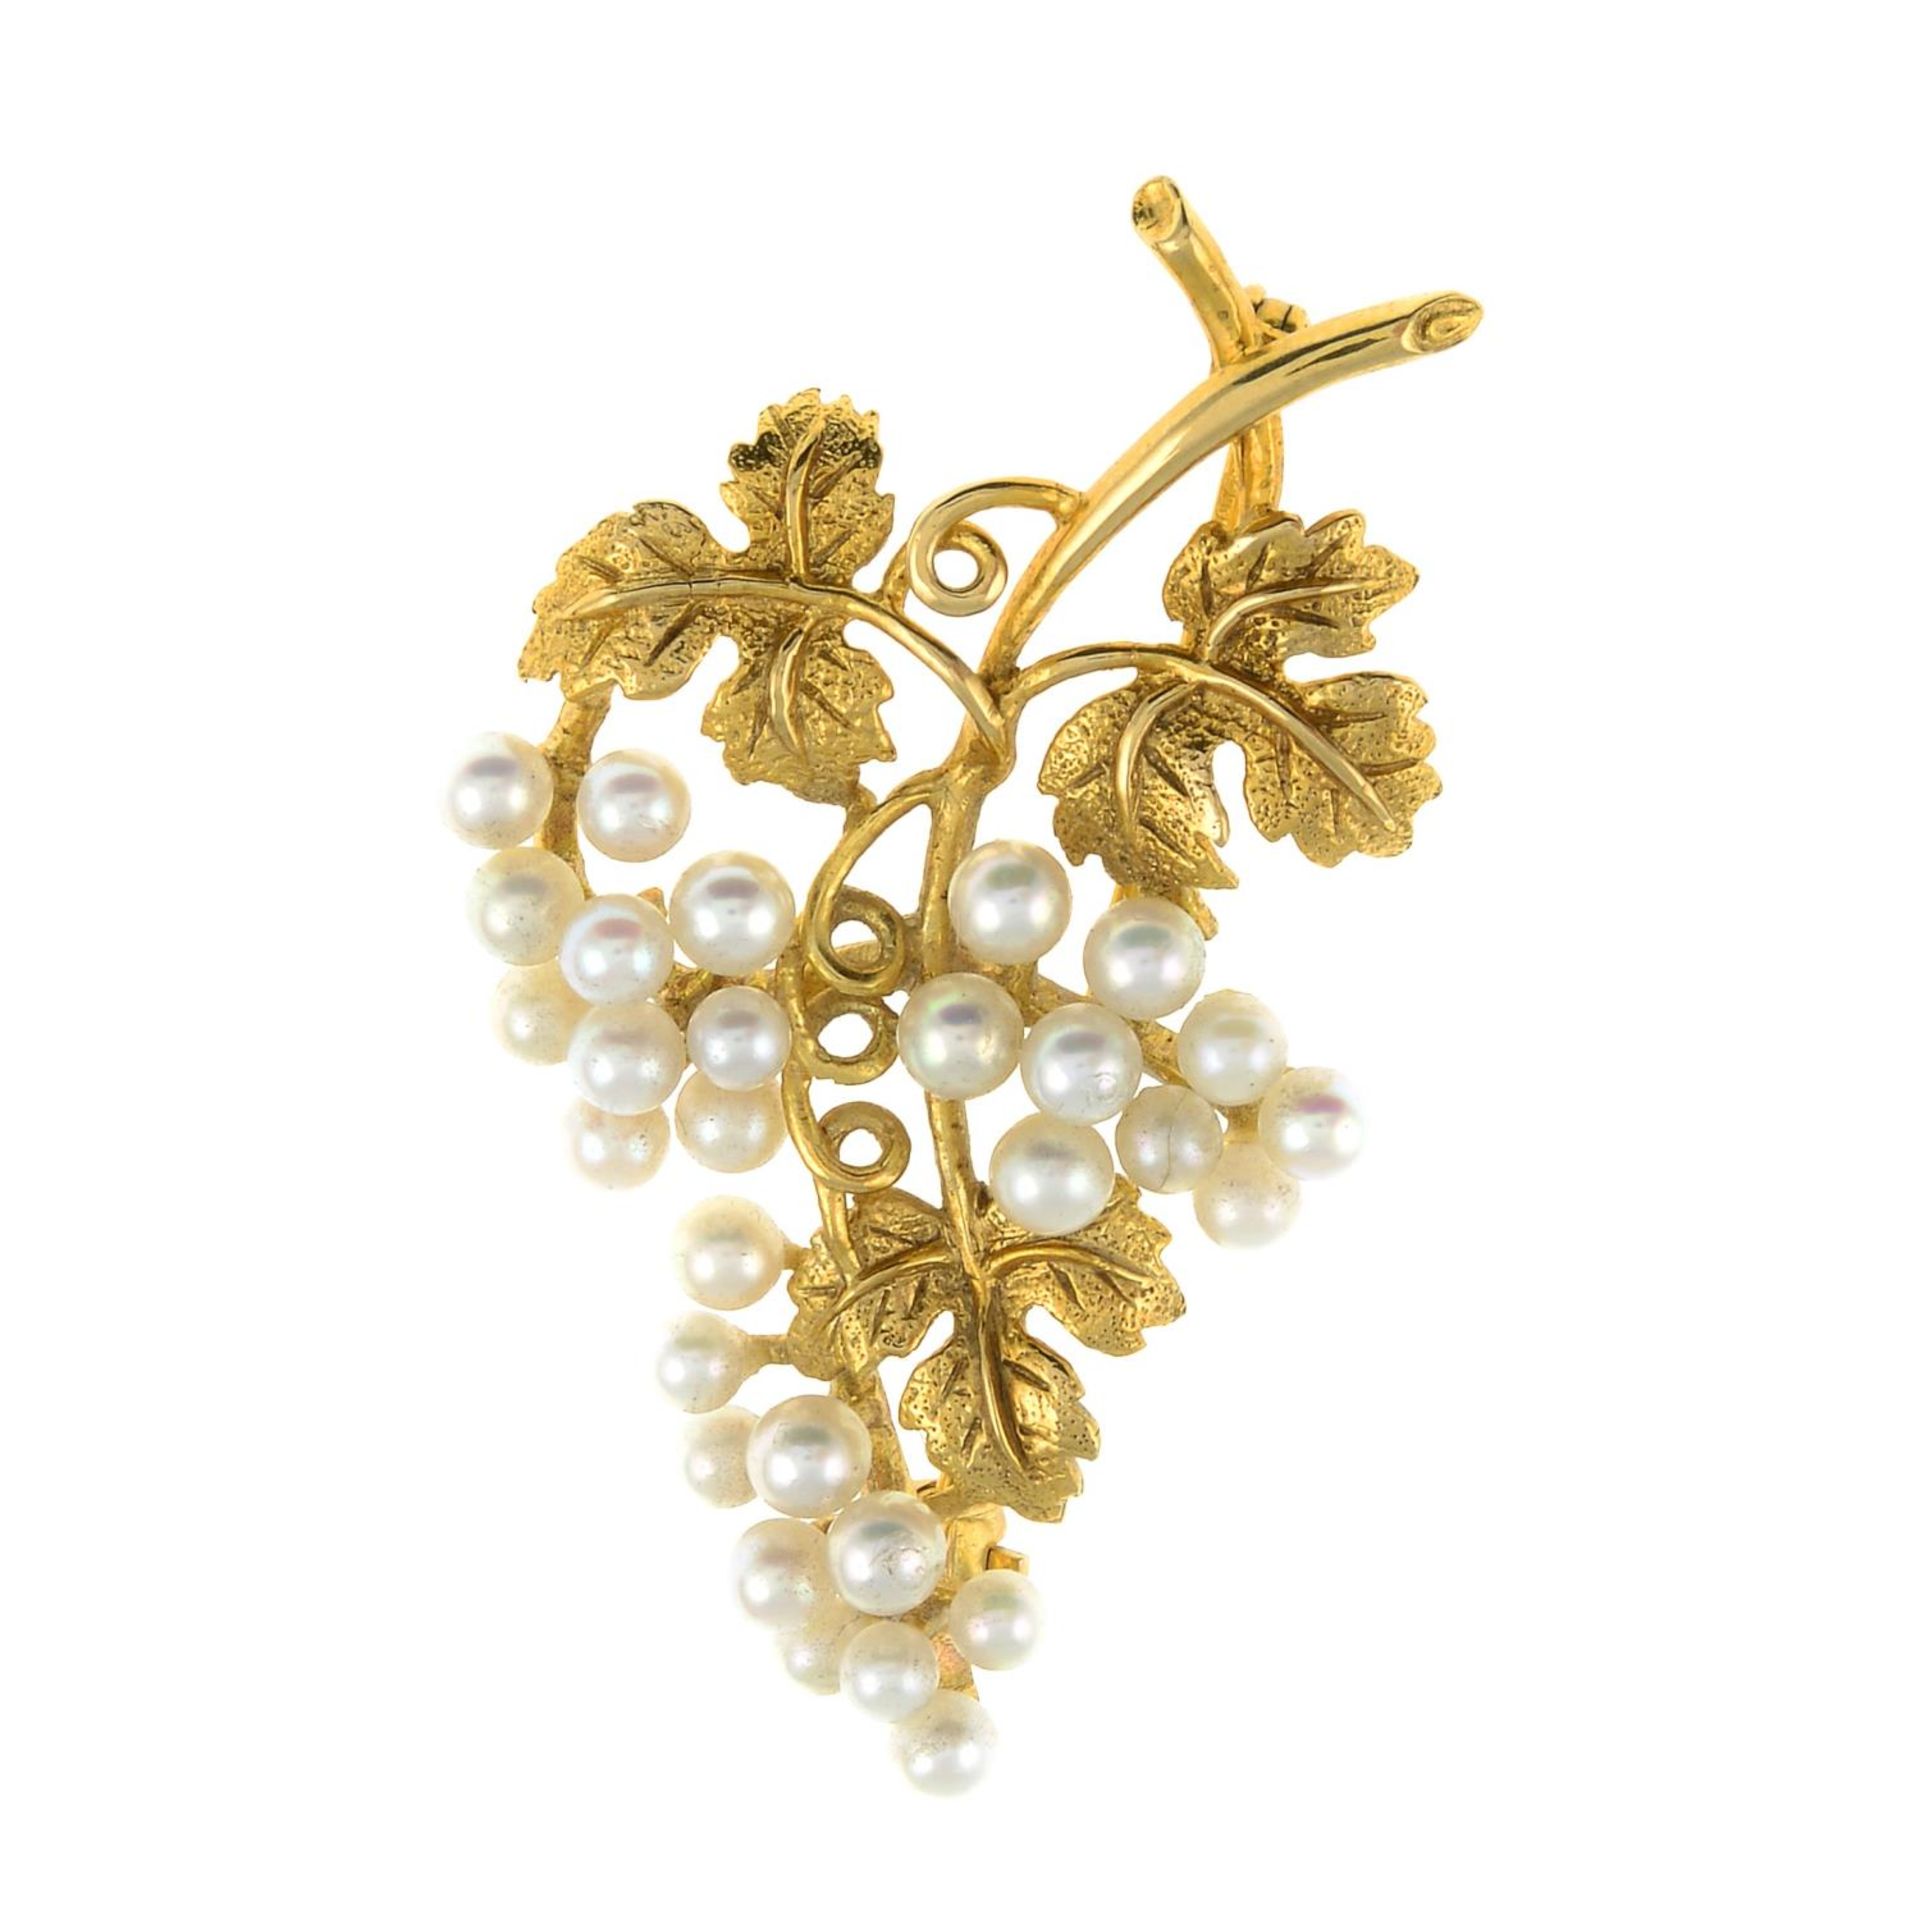 A 9ct gold cultured pearl grape brooch.Hallmarks for 9ct gold.